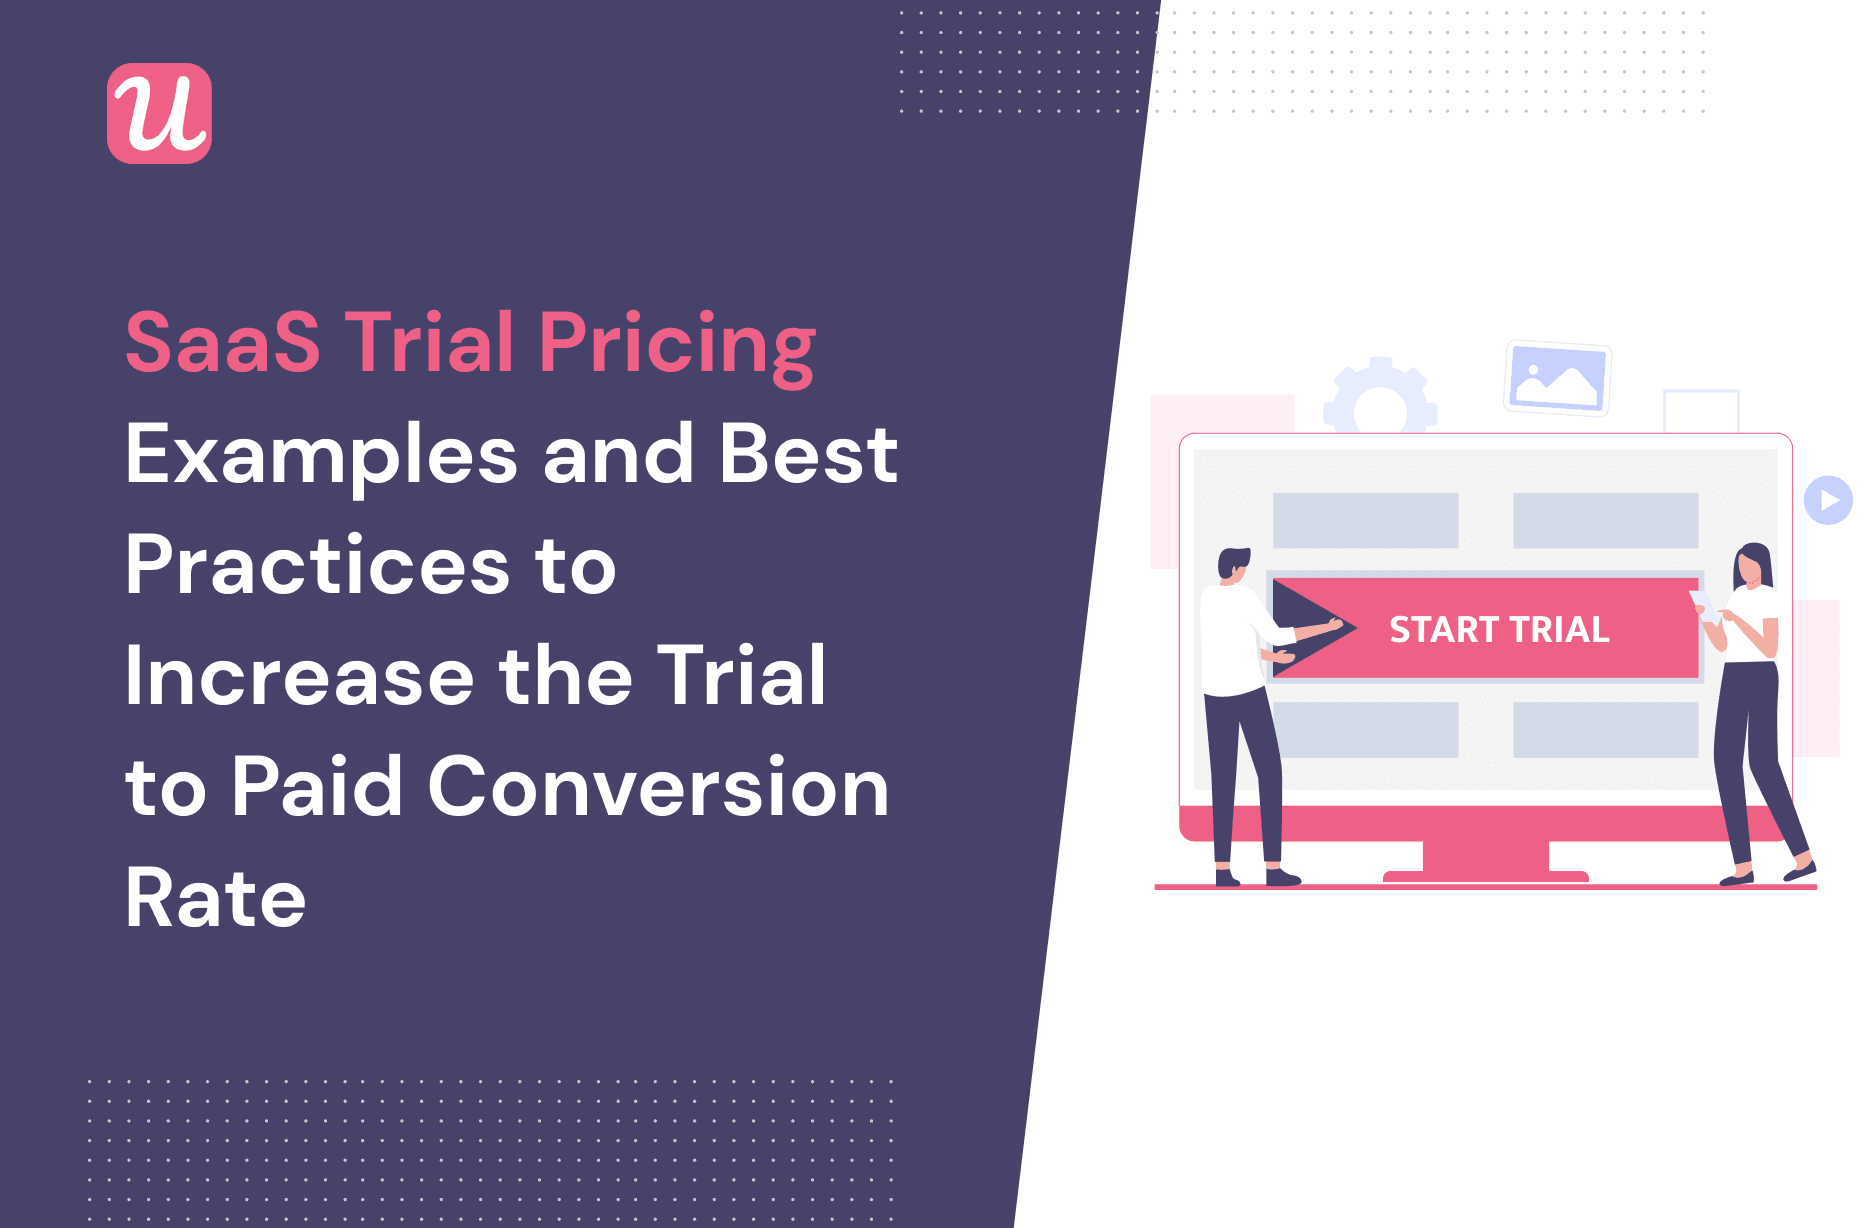 SaaS Trial Pricing: Examples and Best Practices